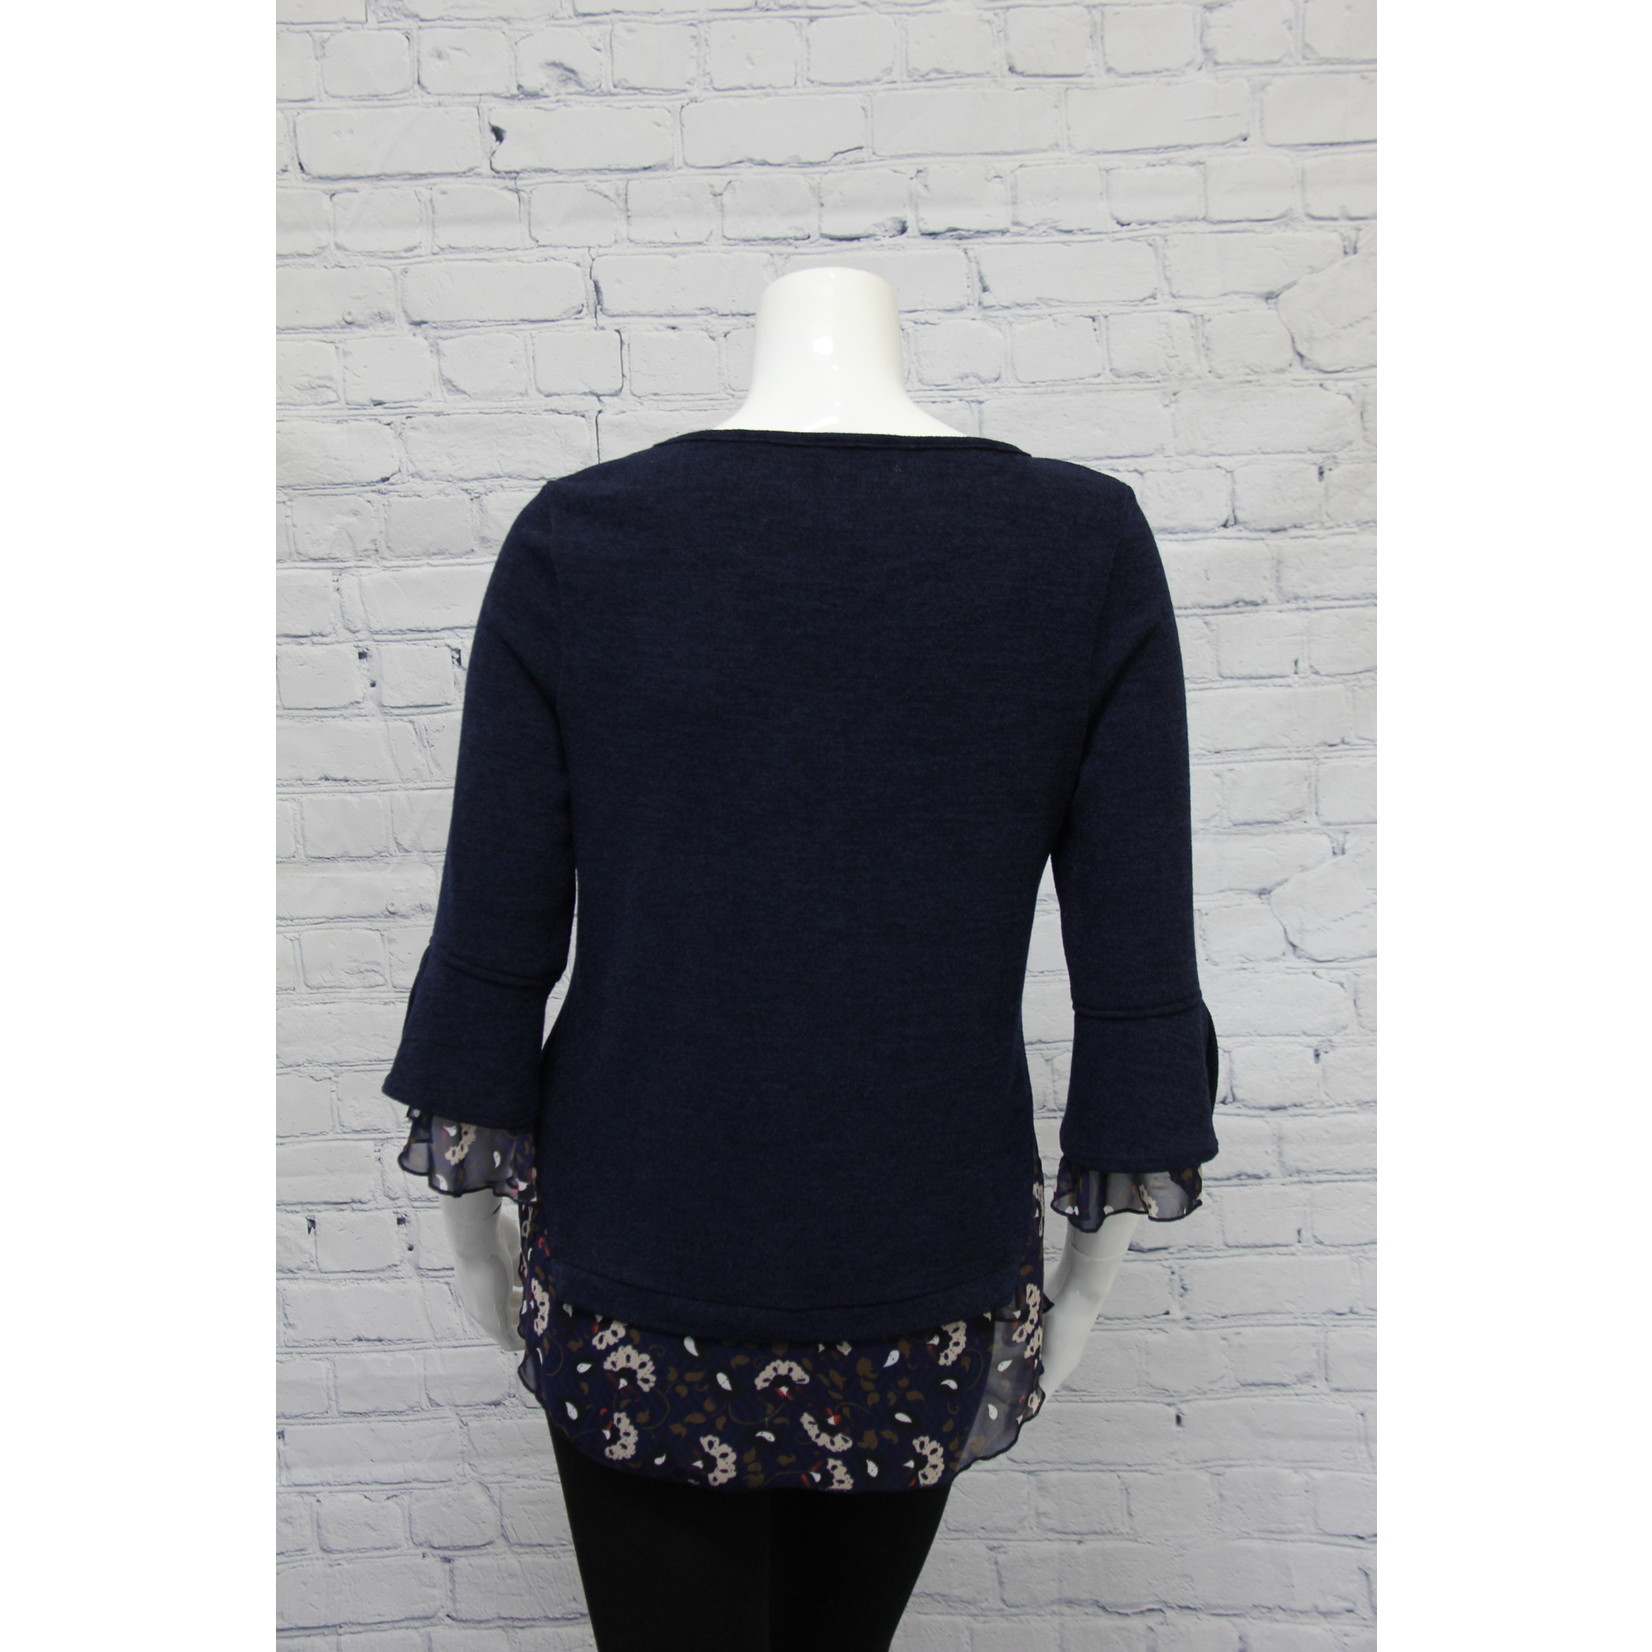 Bali Navy Top with Floral Trim